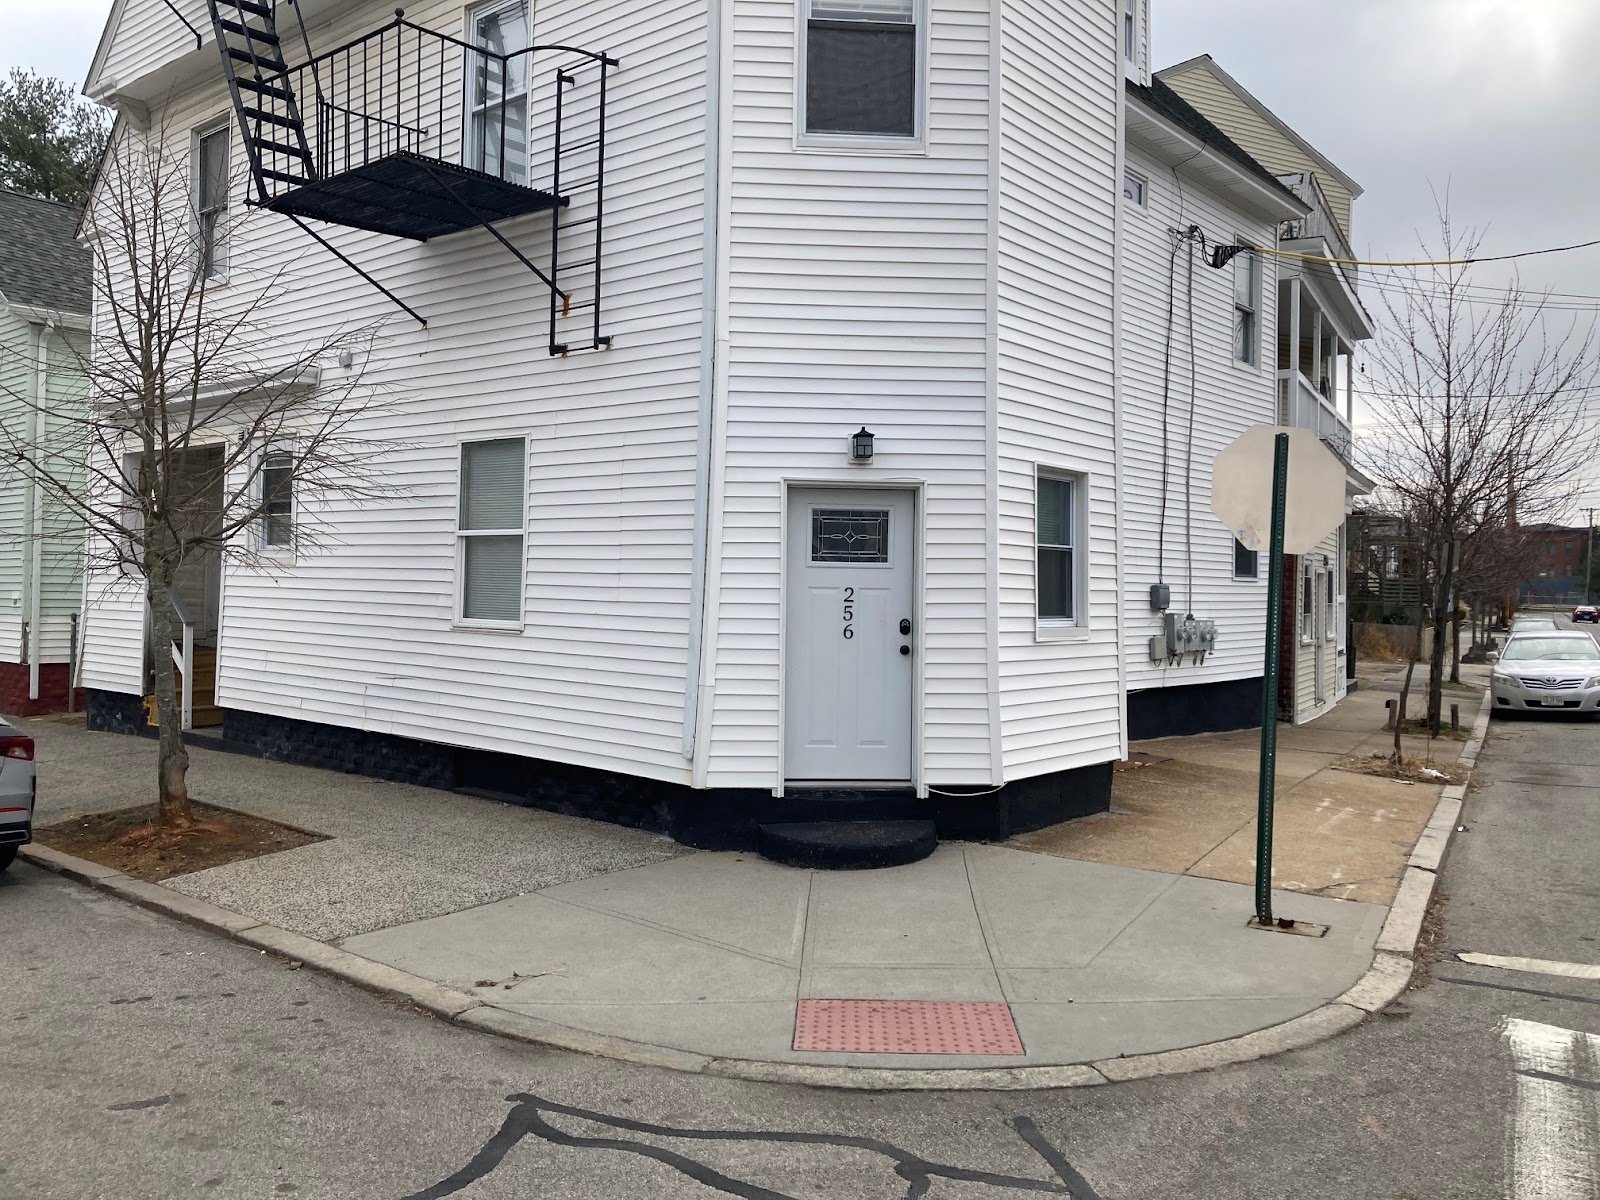  It’s harder to see here under the vinyl, but the storefront entry was here on the corner, with steps up to a direct entry, with the apartments accessed by an entry to the left. 